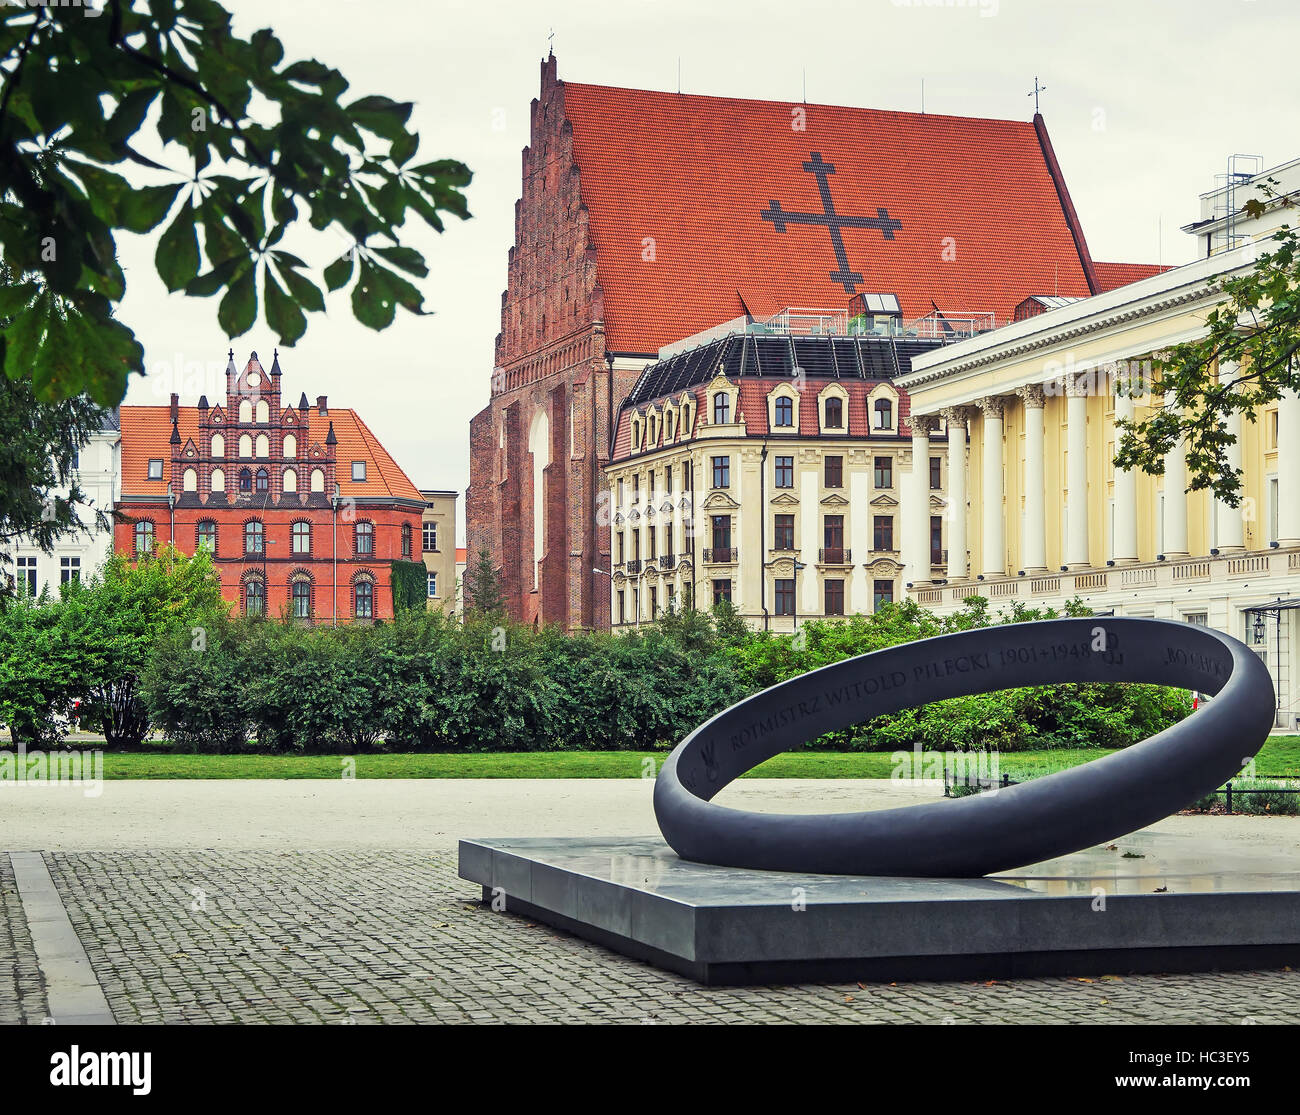 historic church buildings in the eastern european city. Wroclaw, Poland Stock Photo